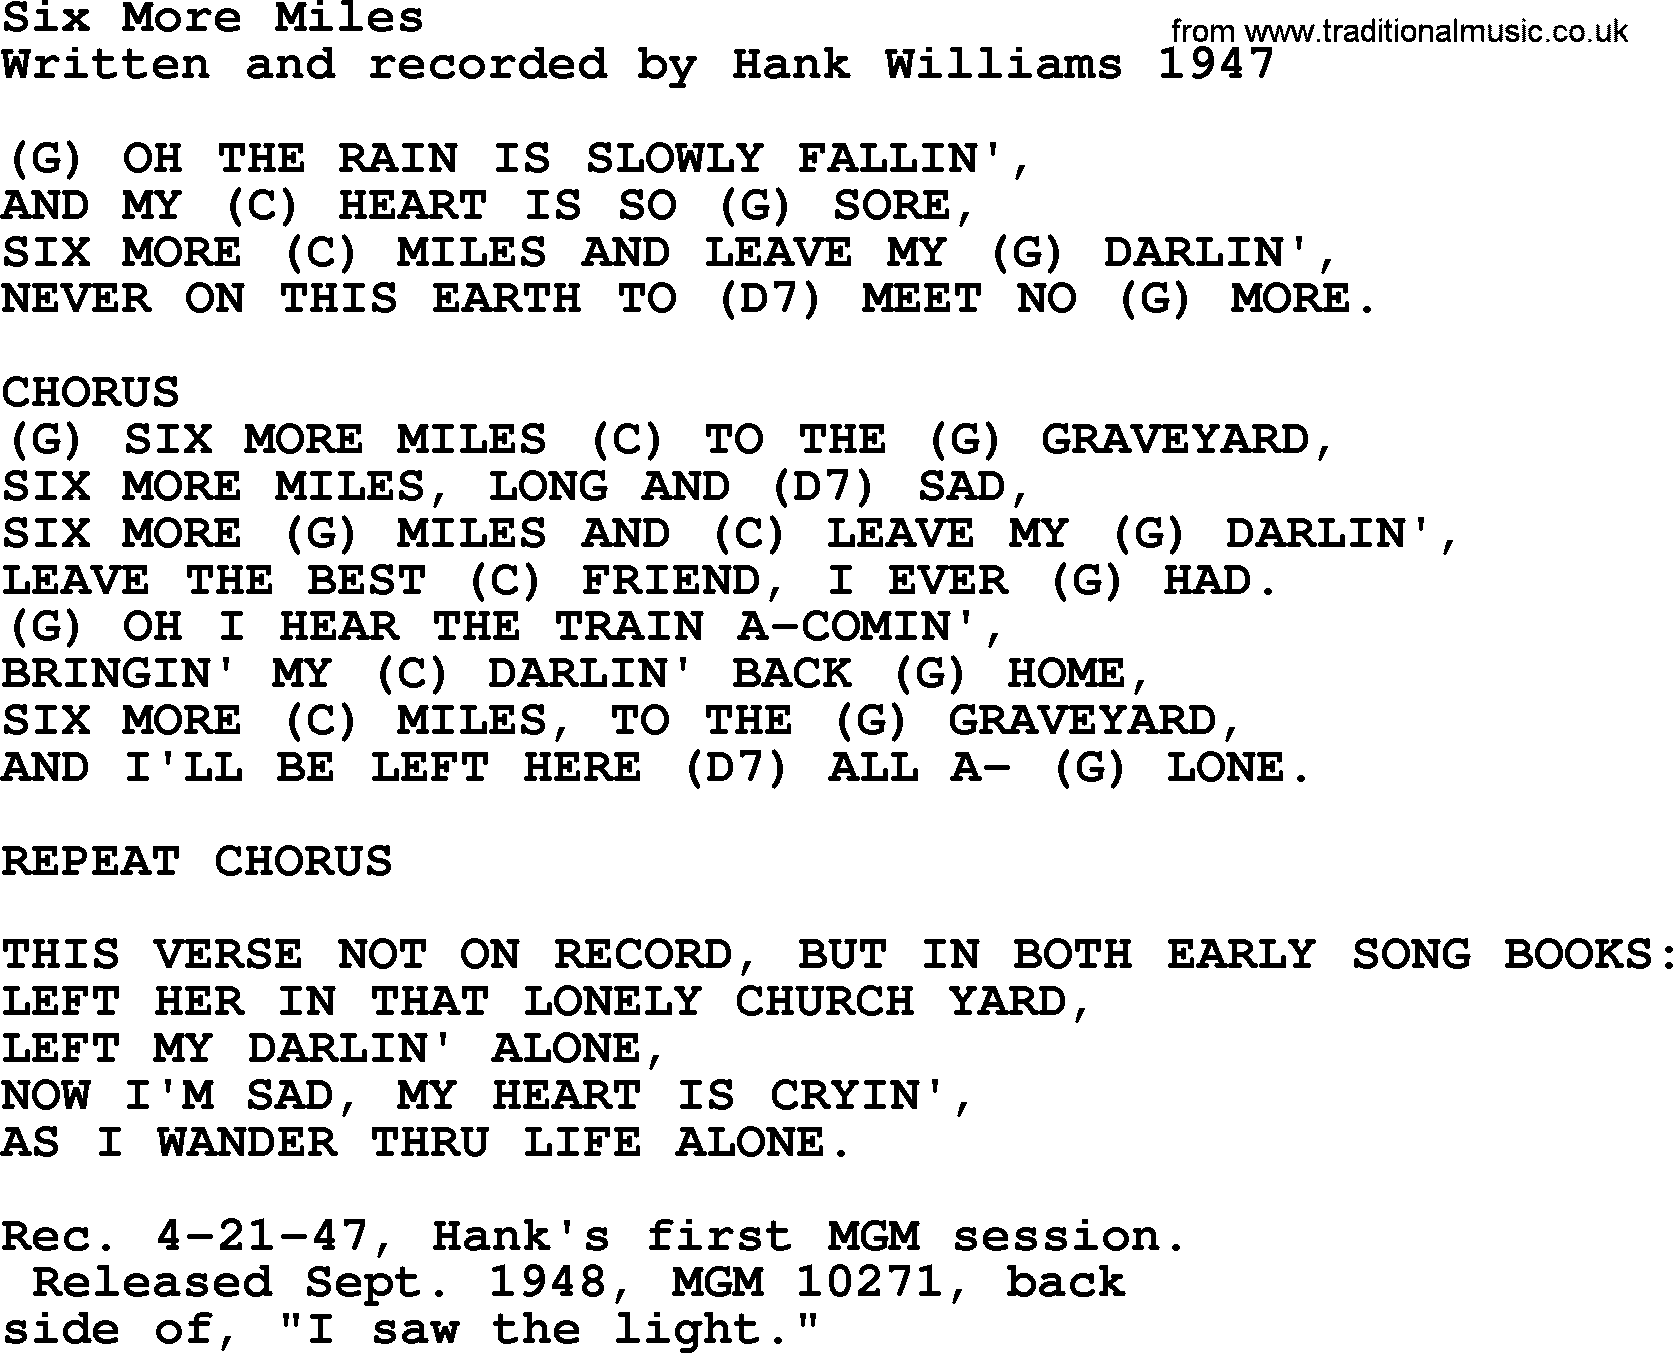 Hank Williams song Six More Miles, lyrics and chords